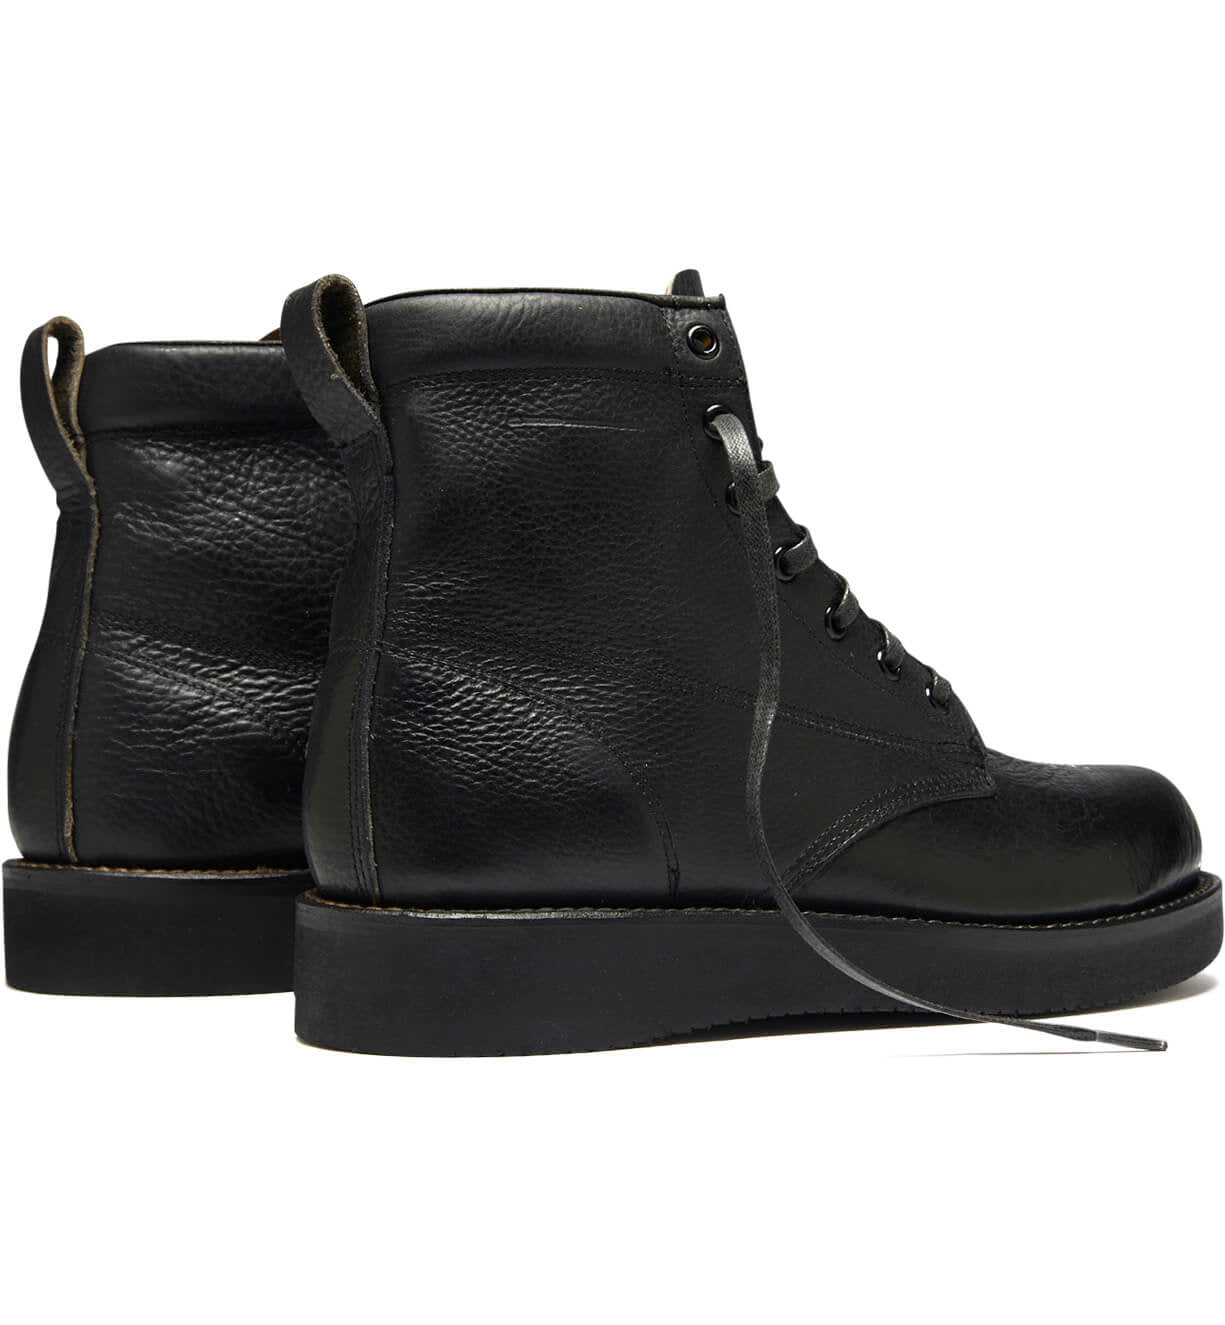 A pair of black leather James boots from the Broken Homme collection on a white background.